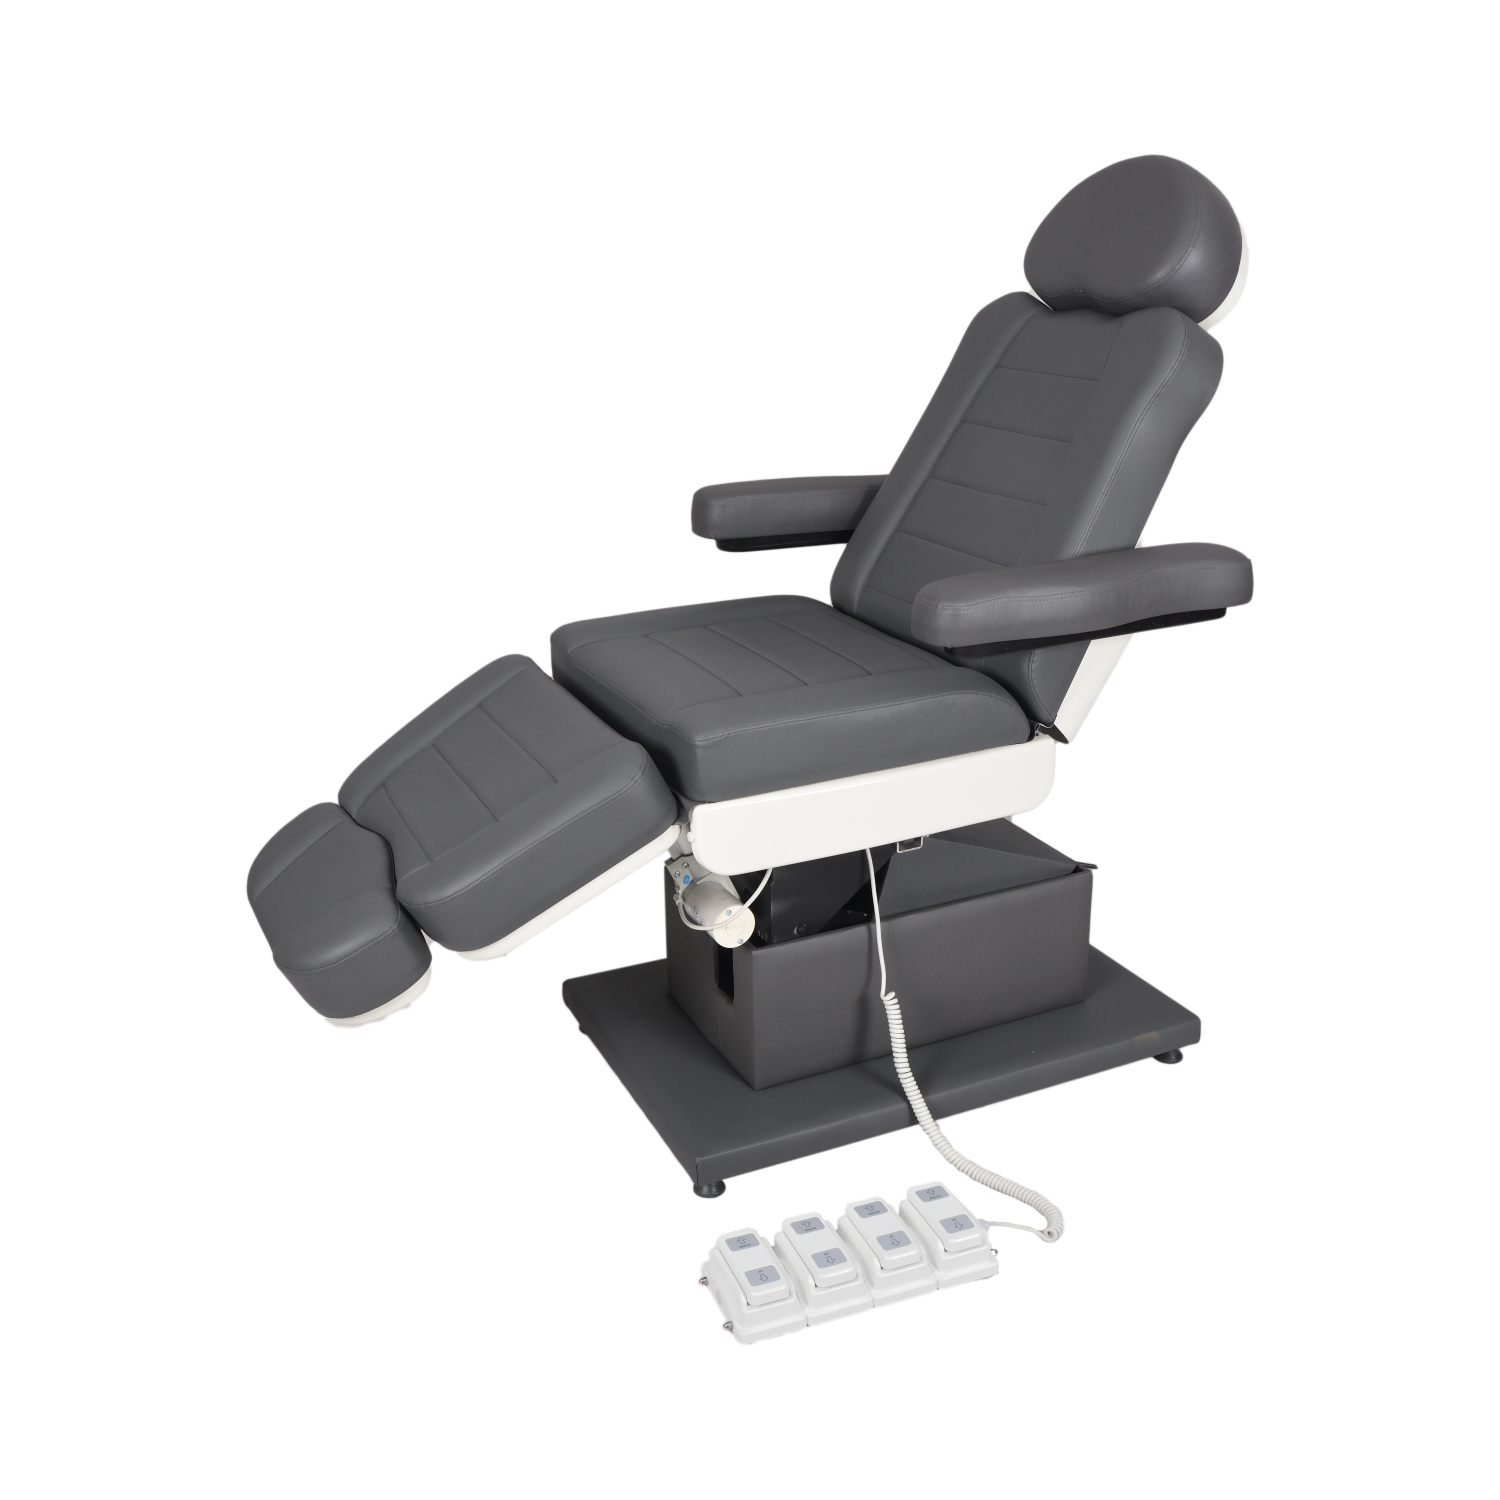 Comfort VIP Hair Transplant and Medical Aesthetic Chair Gray